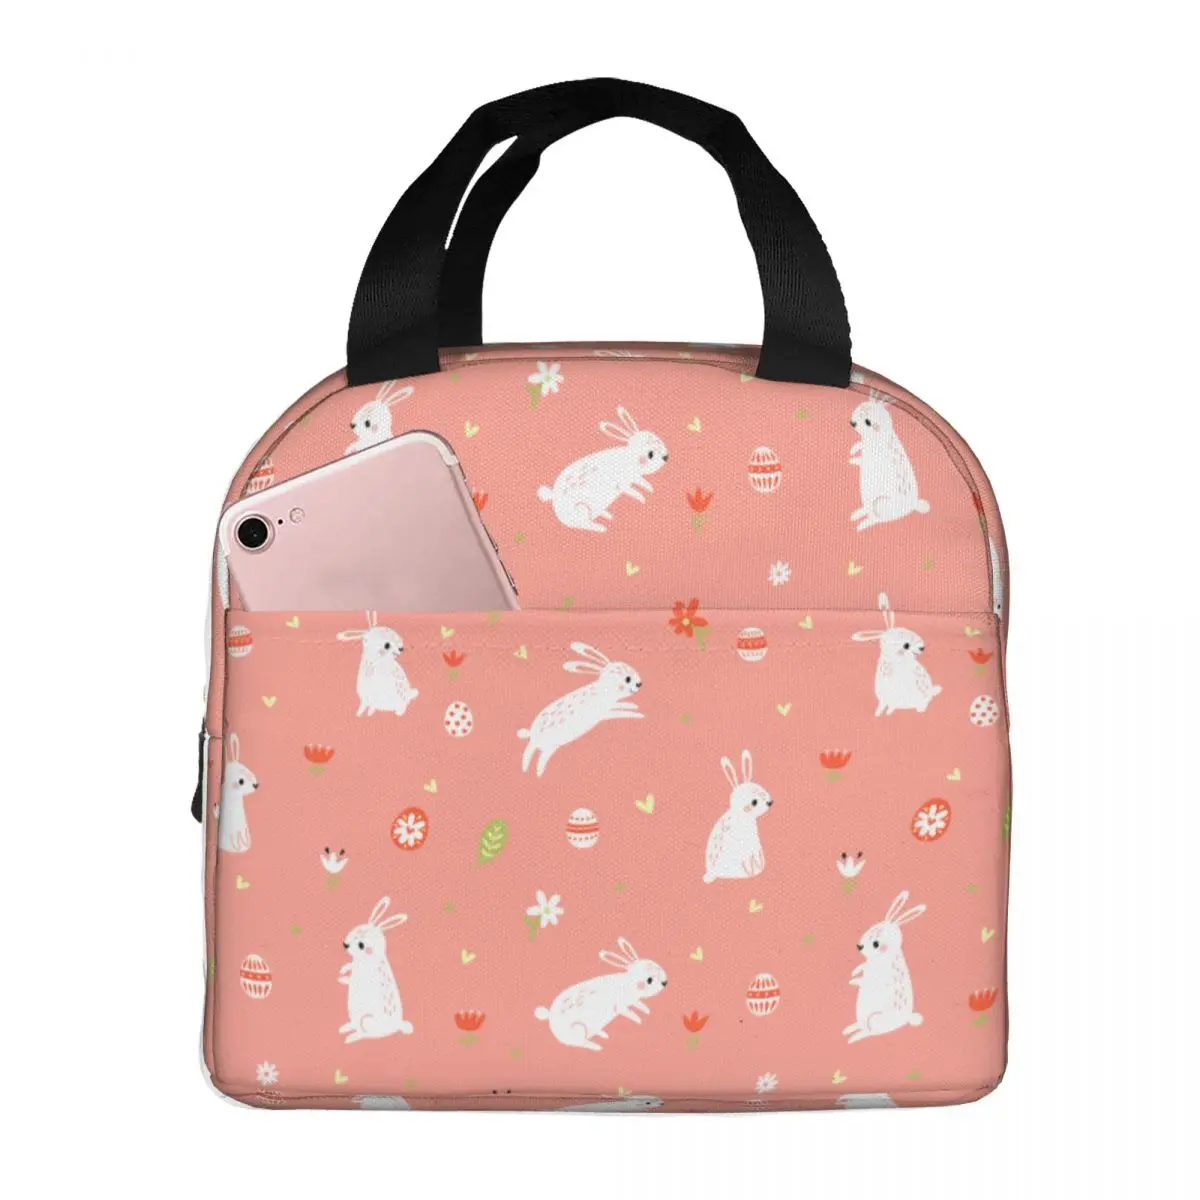 

Easter Hares And Flowers Rabbit Lunch Bag Portable Insulated Cooler Bag Thermal Food Picnic Work Lunch Box for Women Children